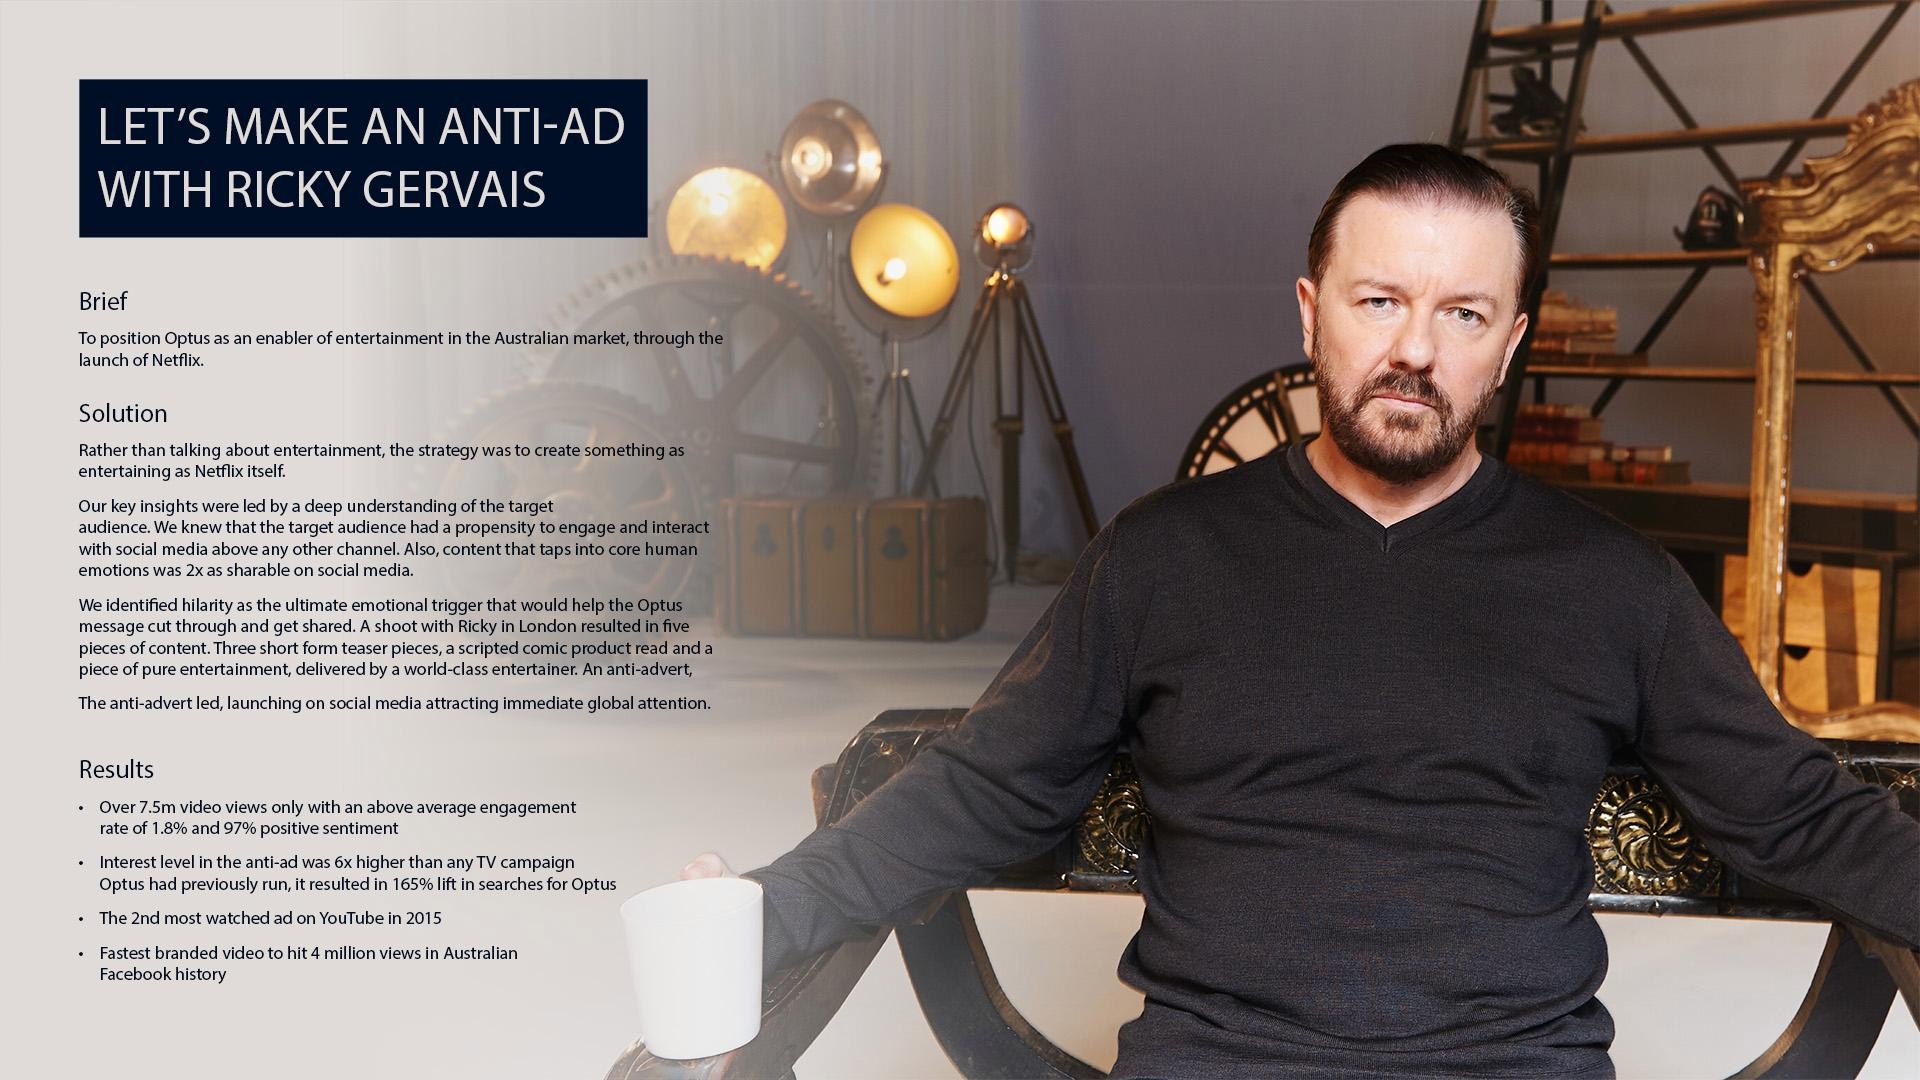 Let's make an anti-ad with Ricky Gervais